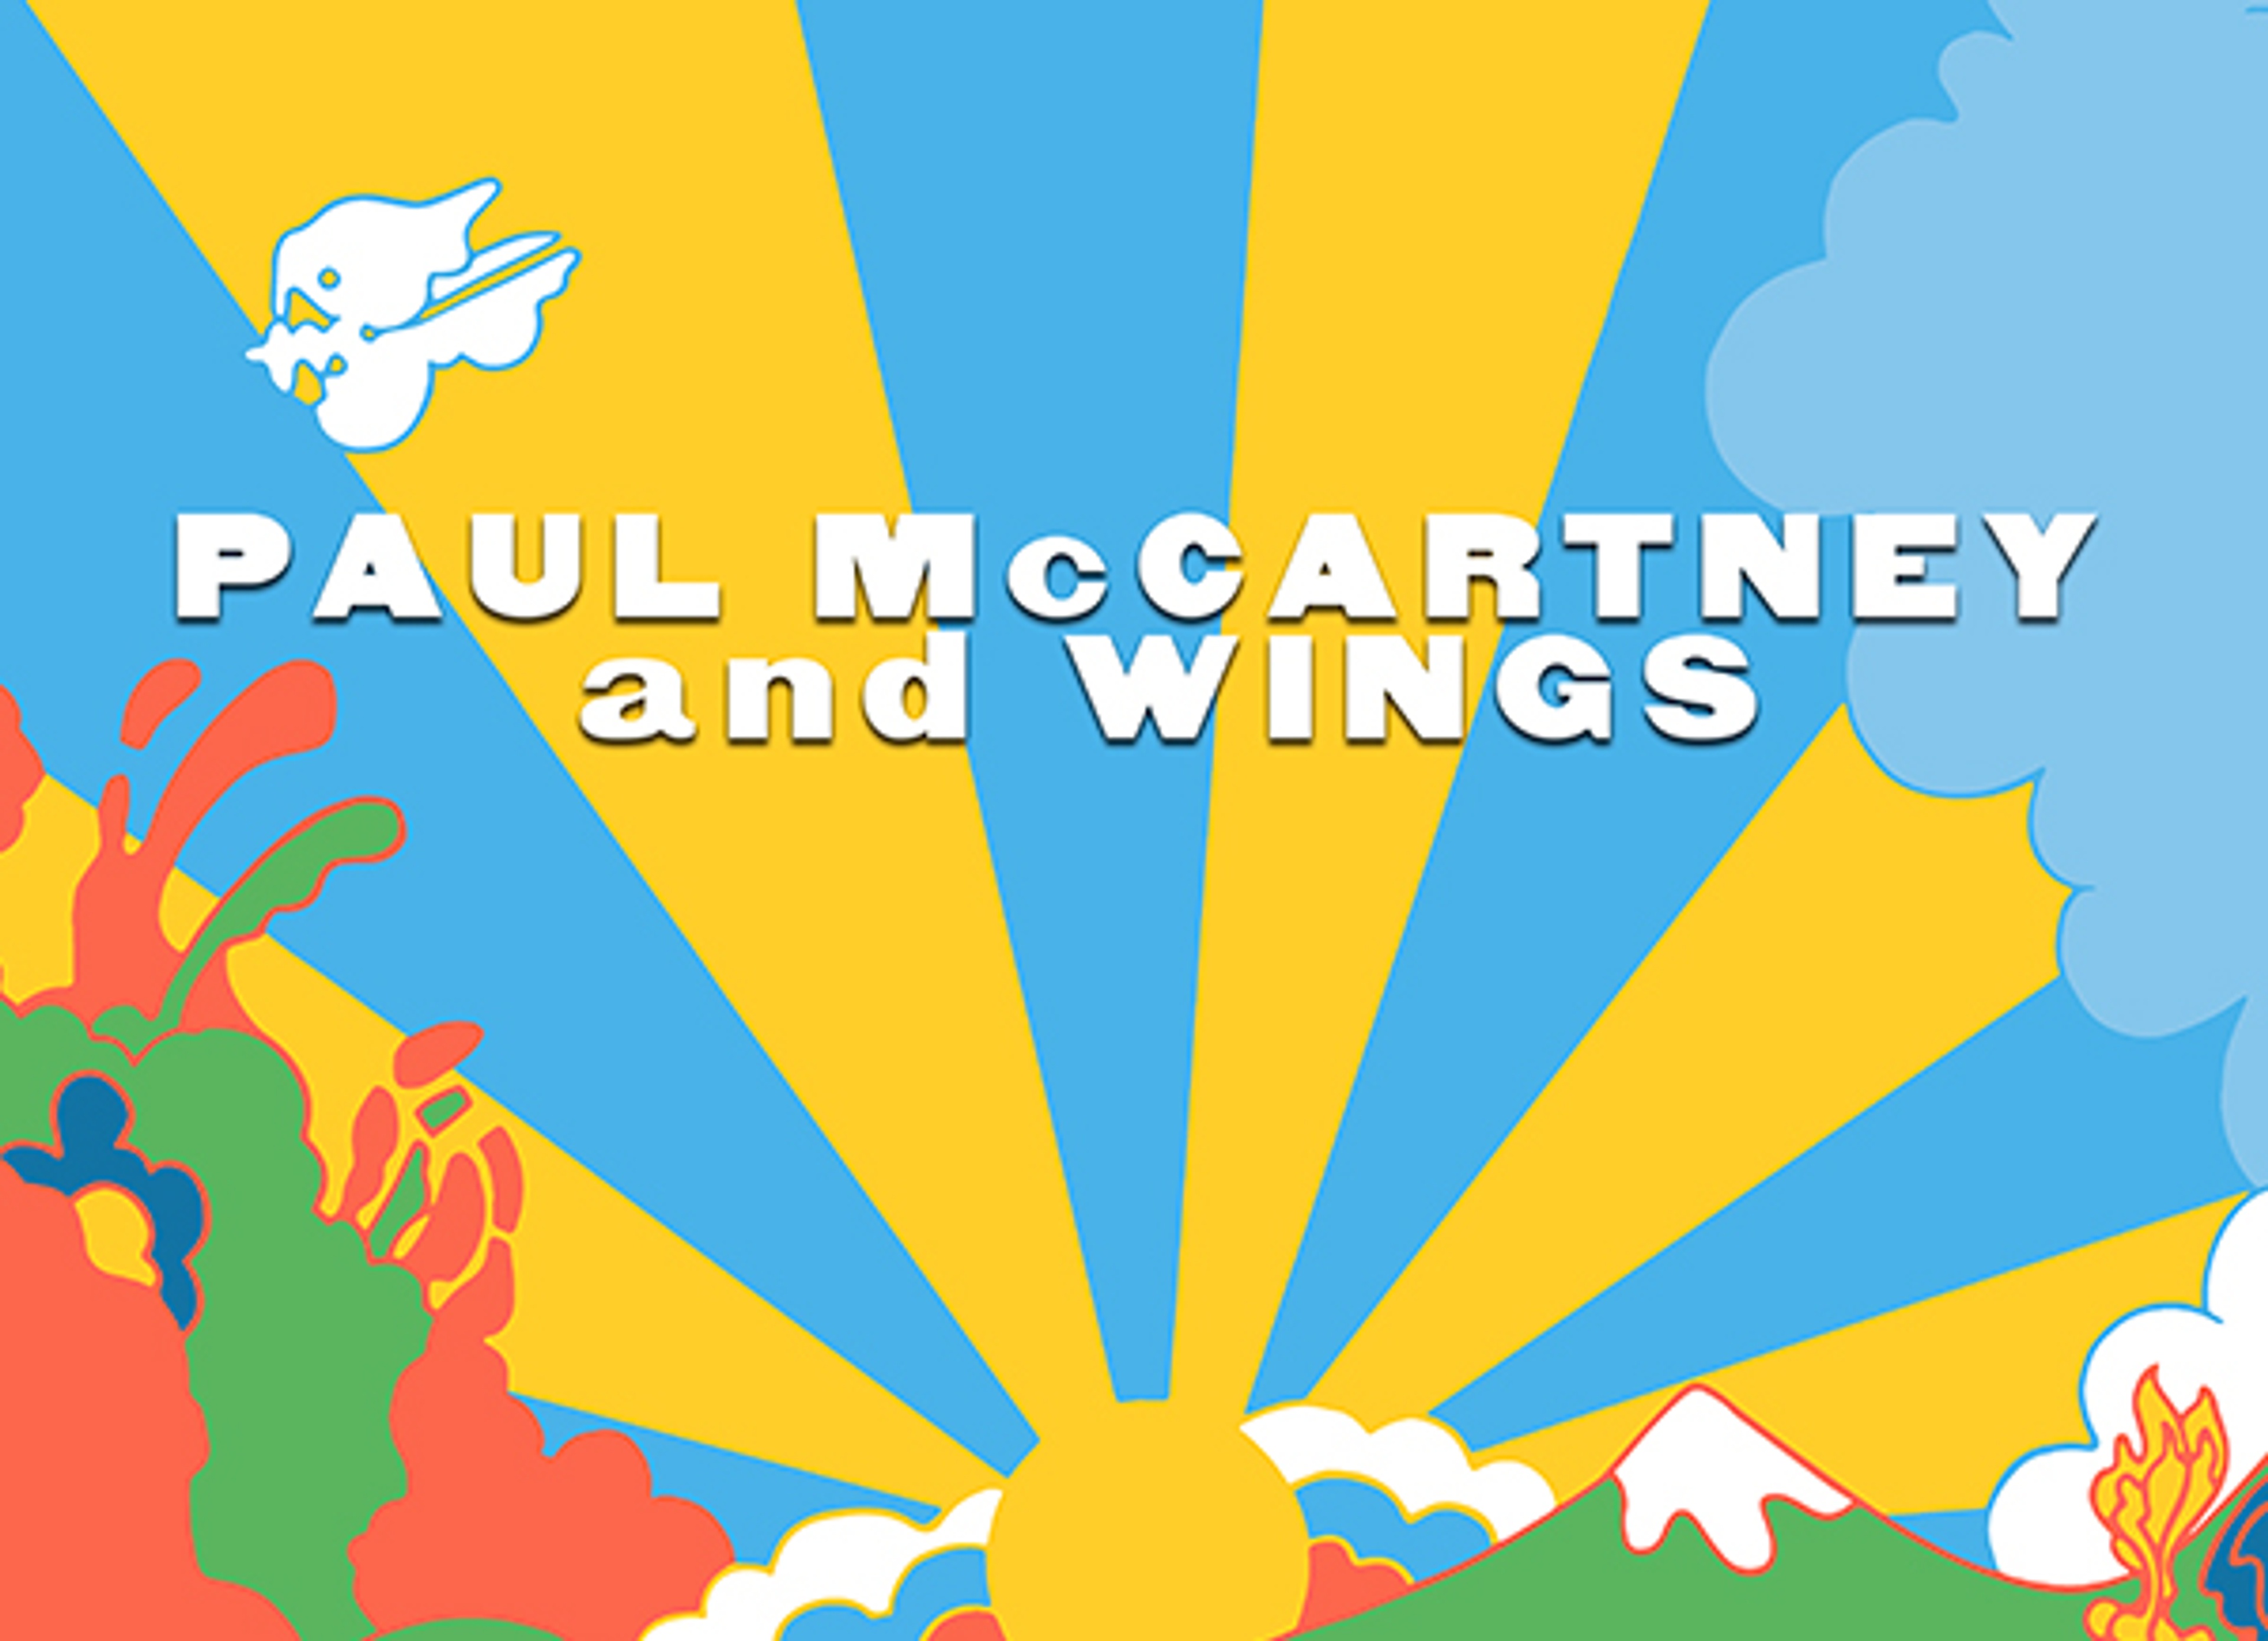 Paul reissues of 'Wild Life' and 'Red Rose Speedway' + 'Wings 1971-73'